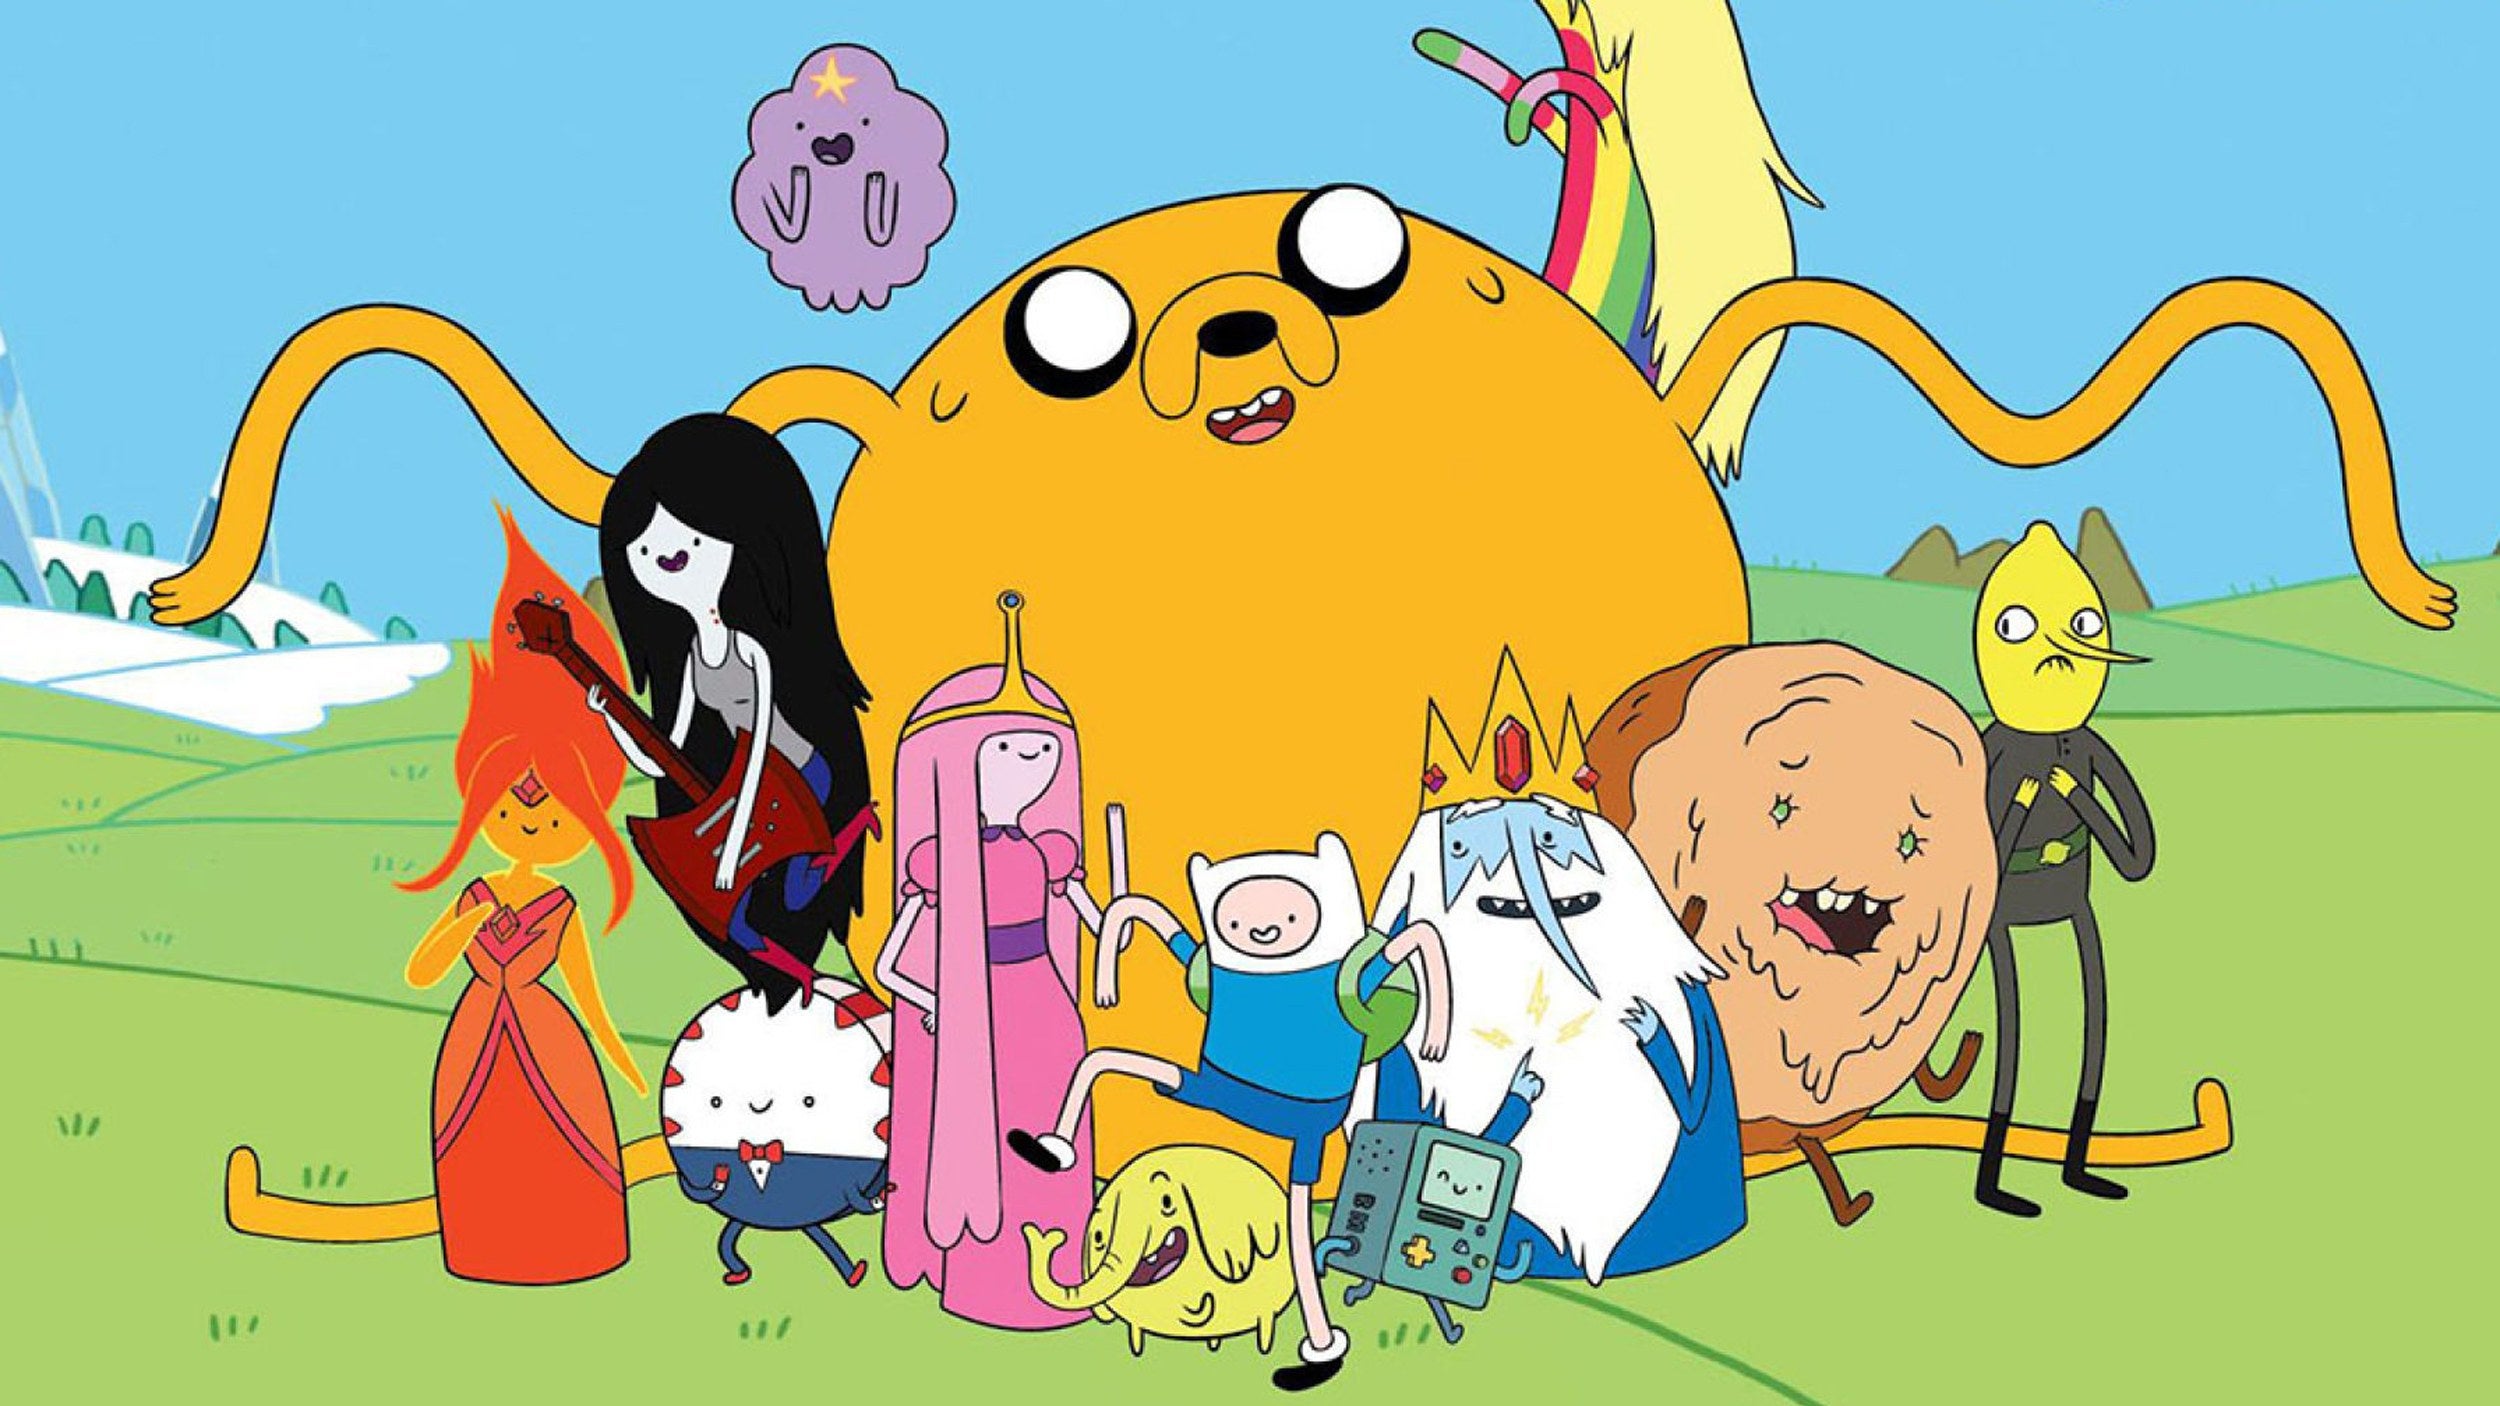 Adventure Time Is Coming Back With A 4-Part Miniseries, But It’s On HBO Max